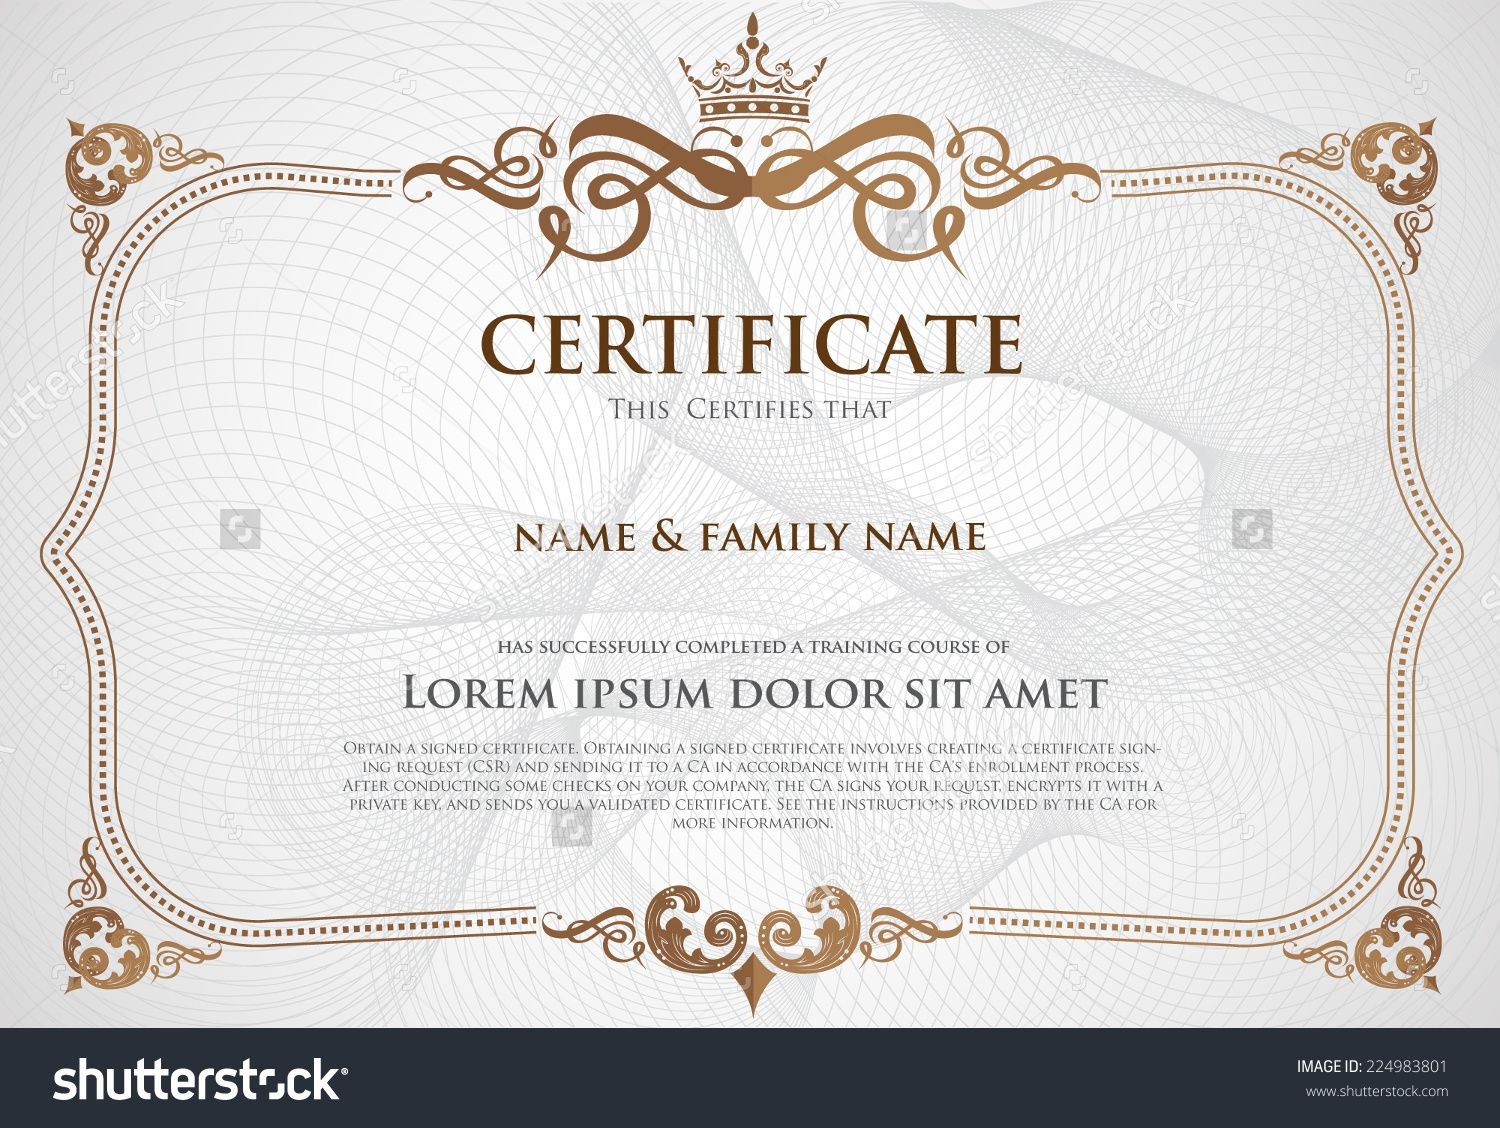 Pin By Mempawah Conserv On Certificate Pinterest Design Vector Free Download